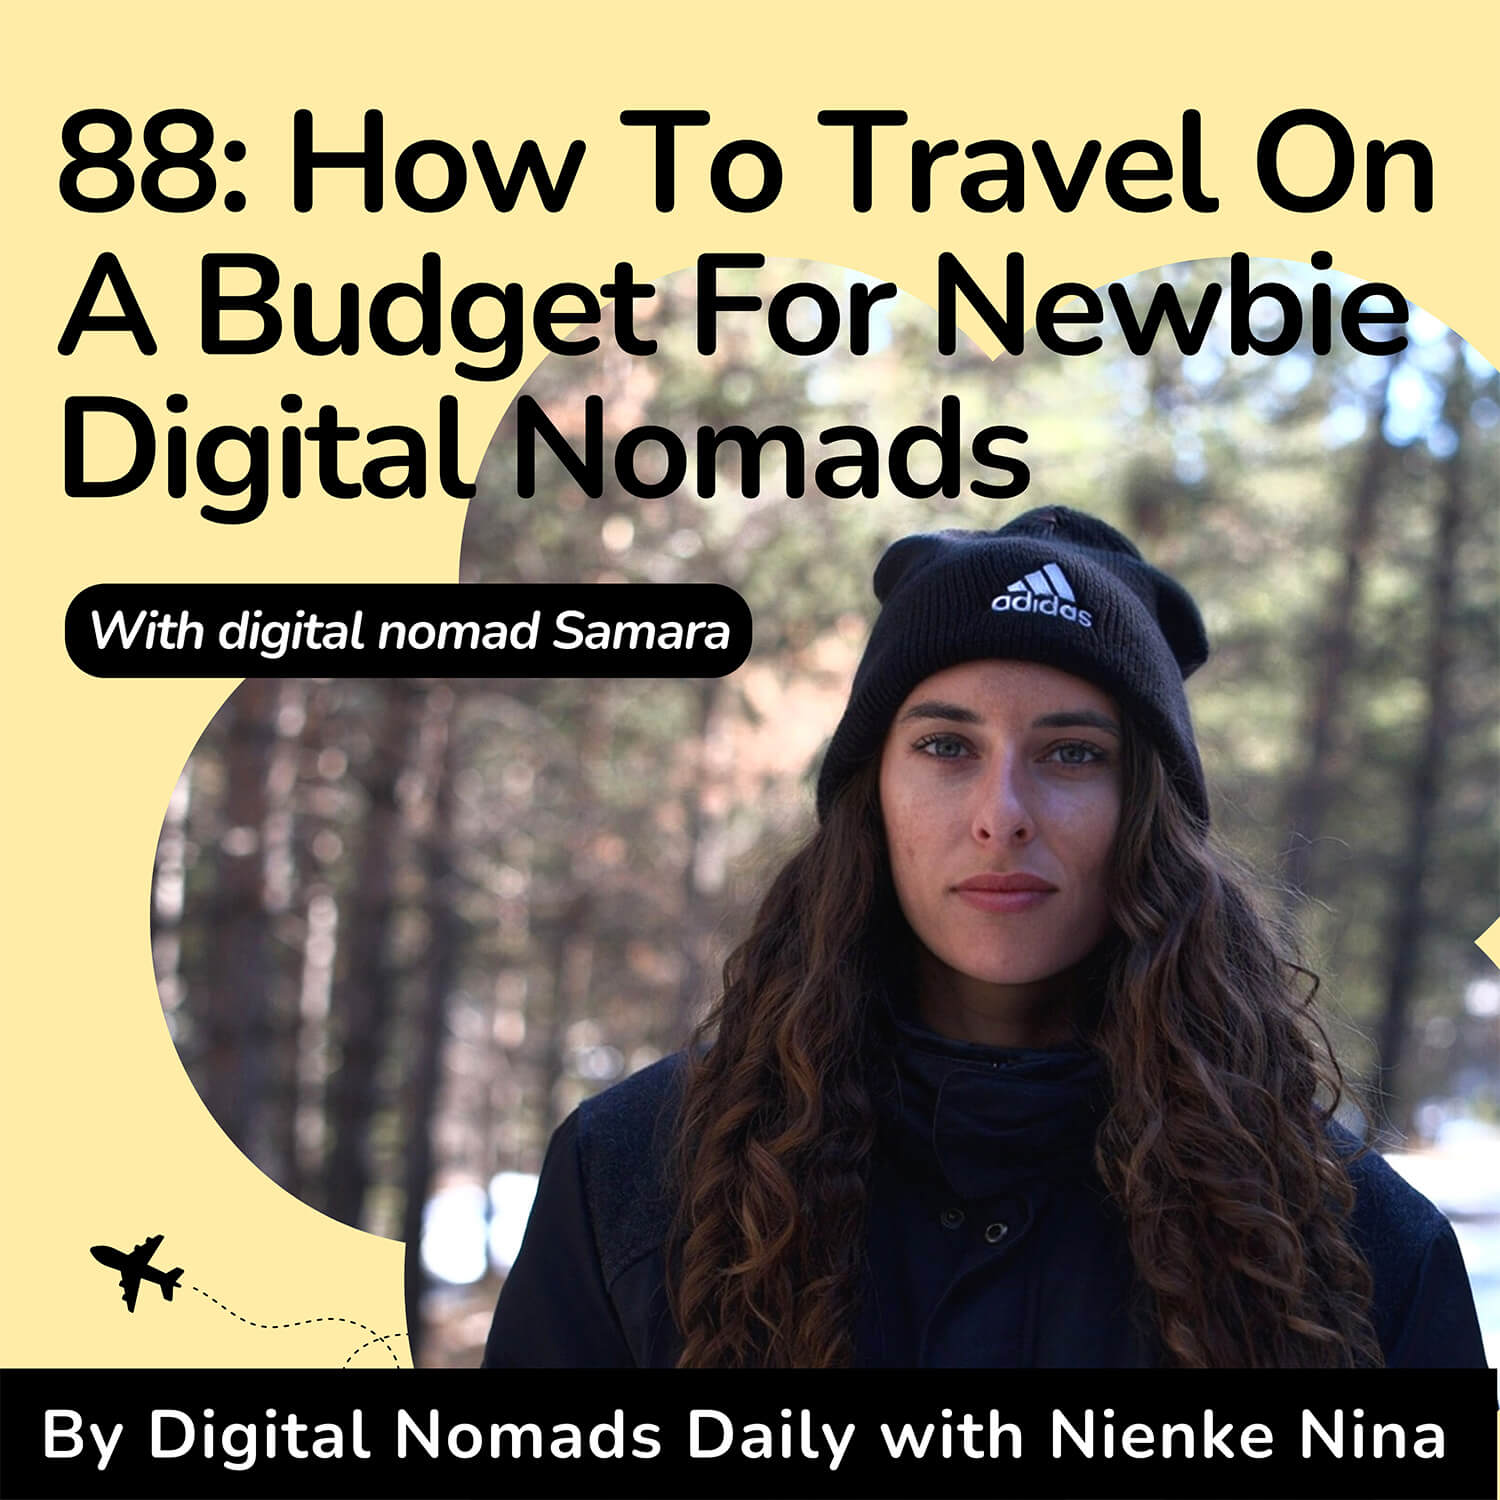 Cover photo of the digital nomads daily podcast 88 How To Travel On A Budget For Newbie Digital Nomads with Digital Nomad Samara